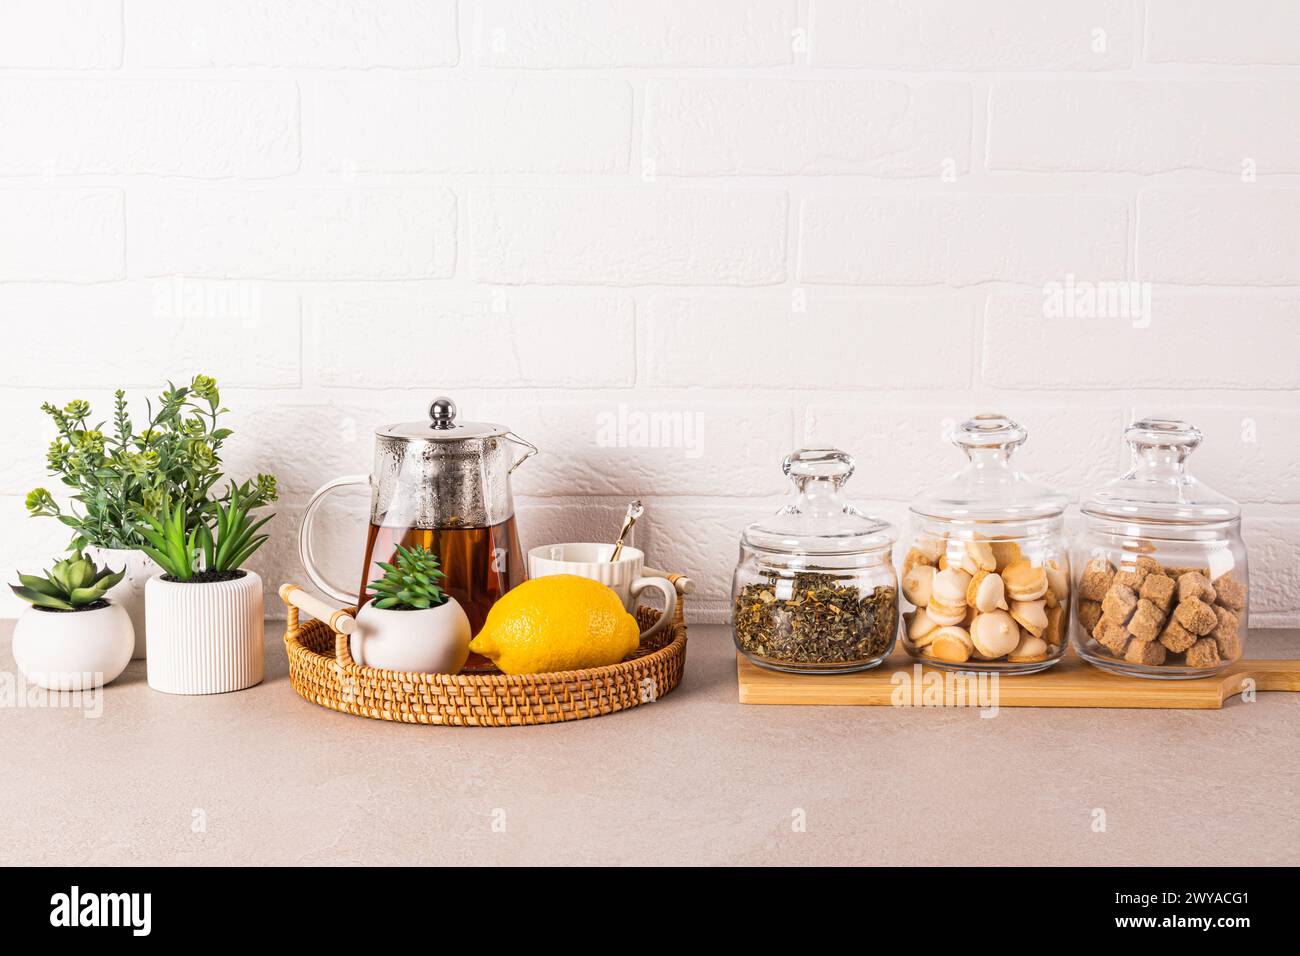 Stylish kitchen background with glass tea pot, lemon, cup, tea jars, sugar, meringue pastry. Green plants in pots. Front view Stock Photo